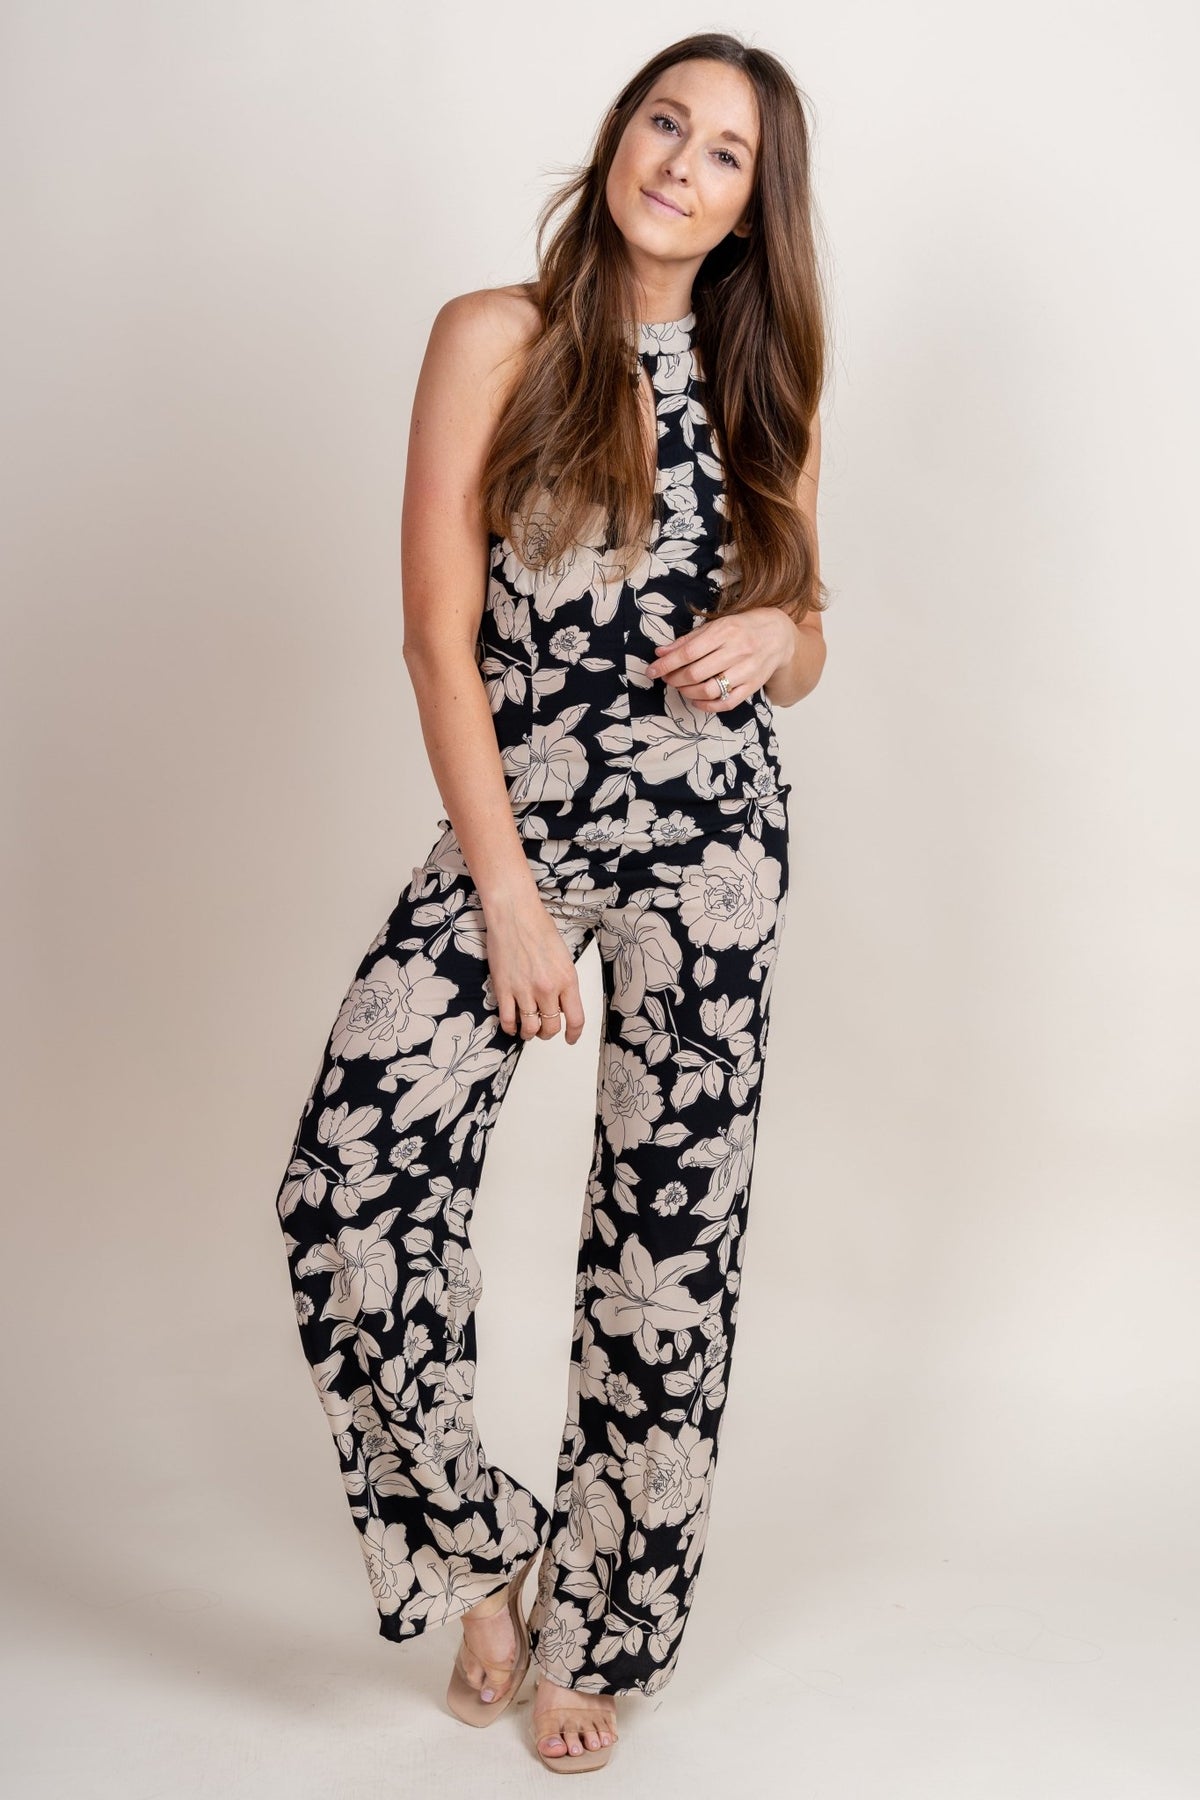 Flower print jumpsuit black/white - Cute Jumpsuit - Trendy Rompers and Pantsuits at Lush Fashion Lounge Boutique in Oklahoma City